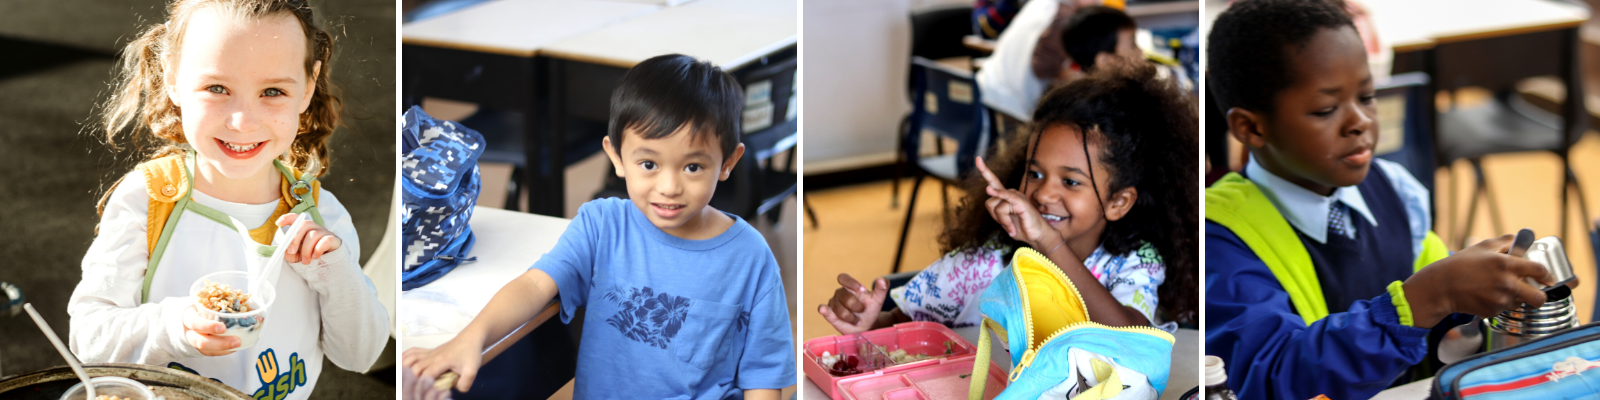 Various photos of smiling students participating in breakfast or lunch programs at schools